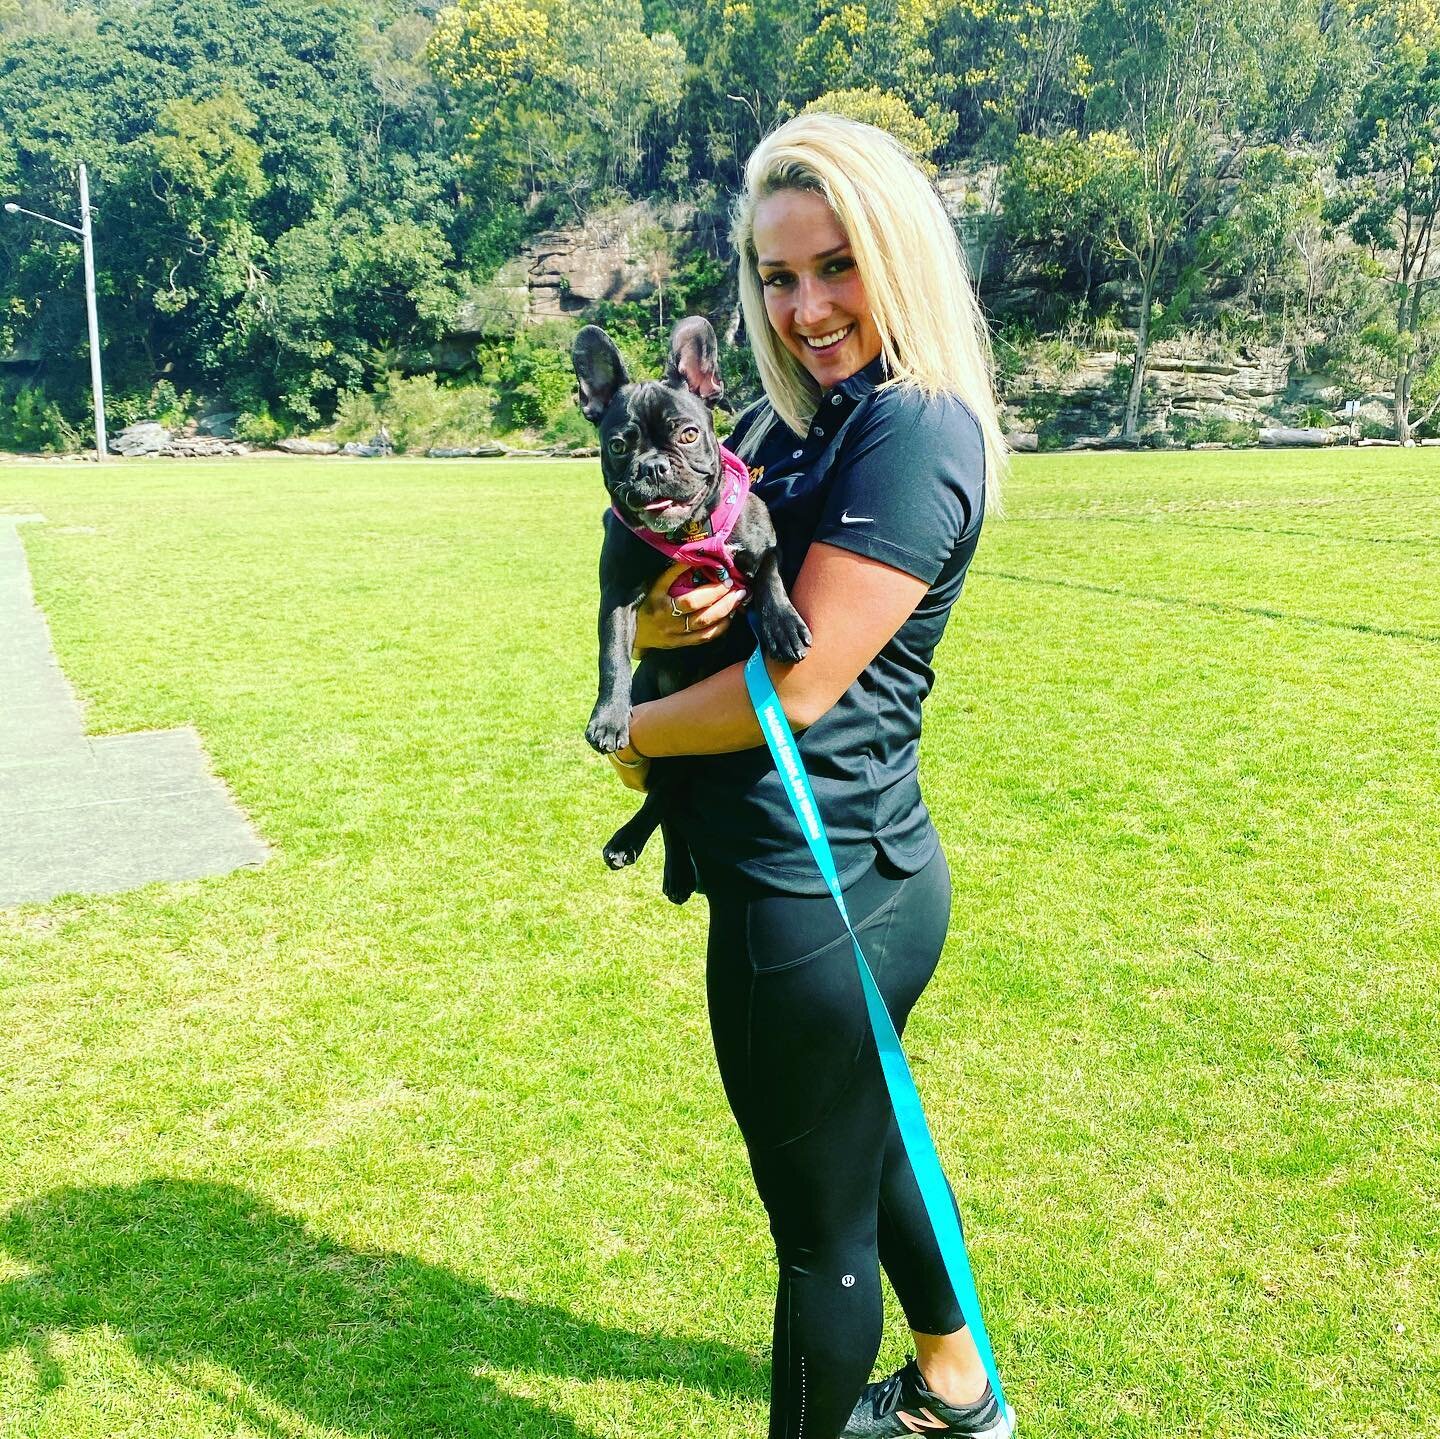 Congrats to Malibu for completing her puppy program with flying colours! Such a gorgeous little girl! #frenchbulldog #frenchiepuppy